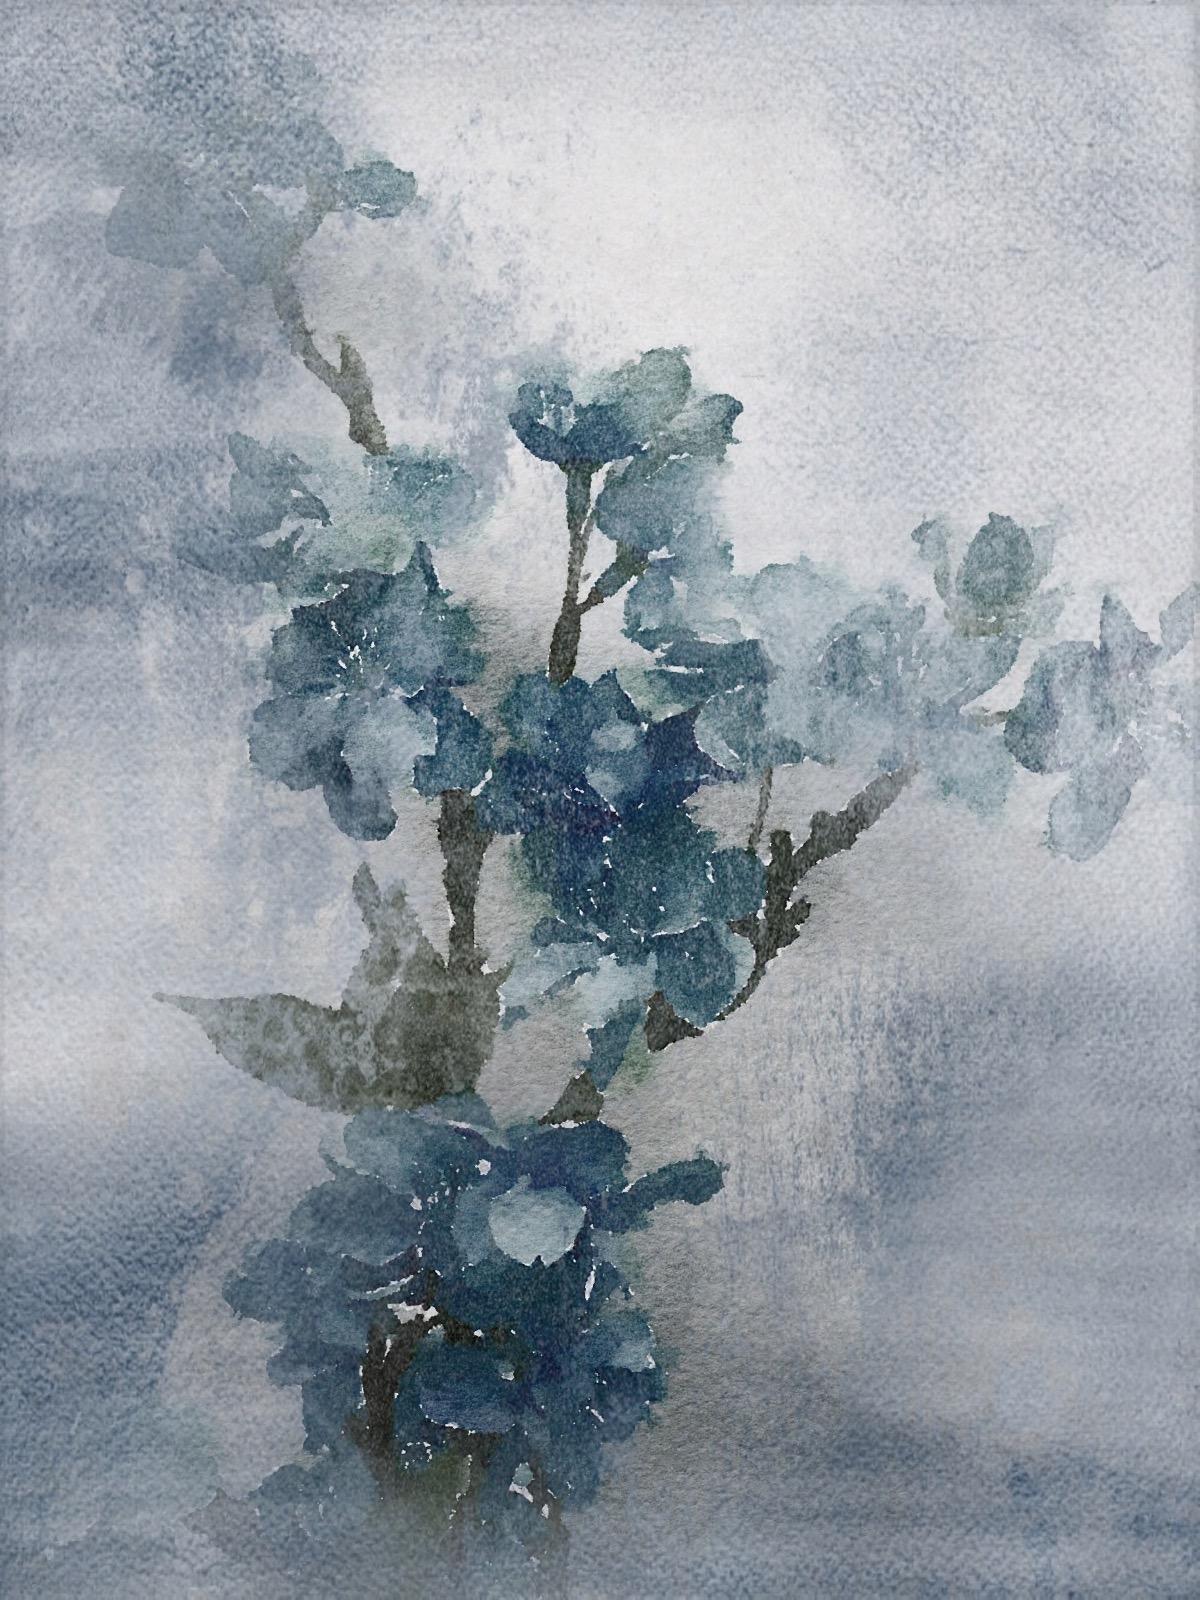 Beyond Blue 2, Rustic Flowers Painting Embellished Giclee on Canvas 40w X 60h

State-of-the-art HAND EMBELLISHED ∽ MUSEUM QUALITY ∽ DISPLAY READY Giclee Reproduction
Each limited edition Giclee is hand embellished by the artist, making it one of a